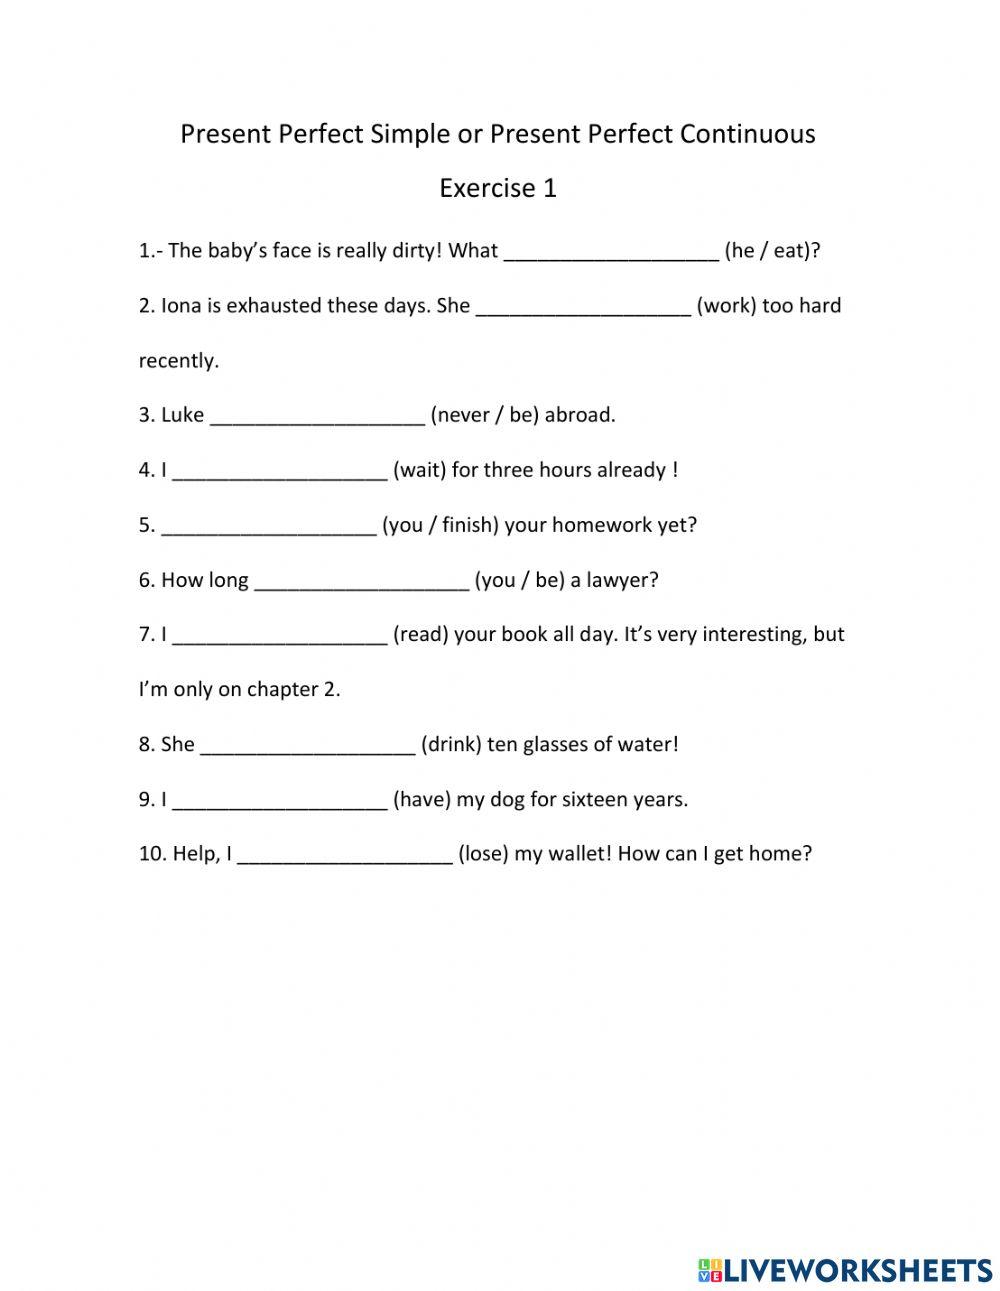 Present Perfect Simple or Present Perfect Continuous Exercise 1